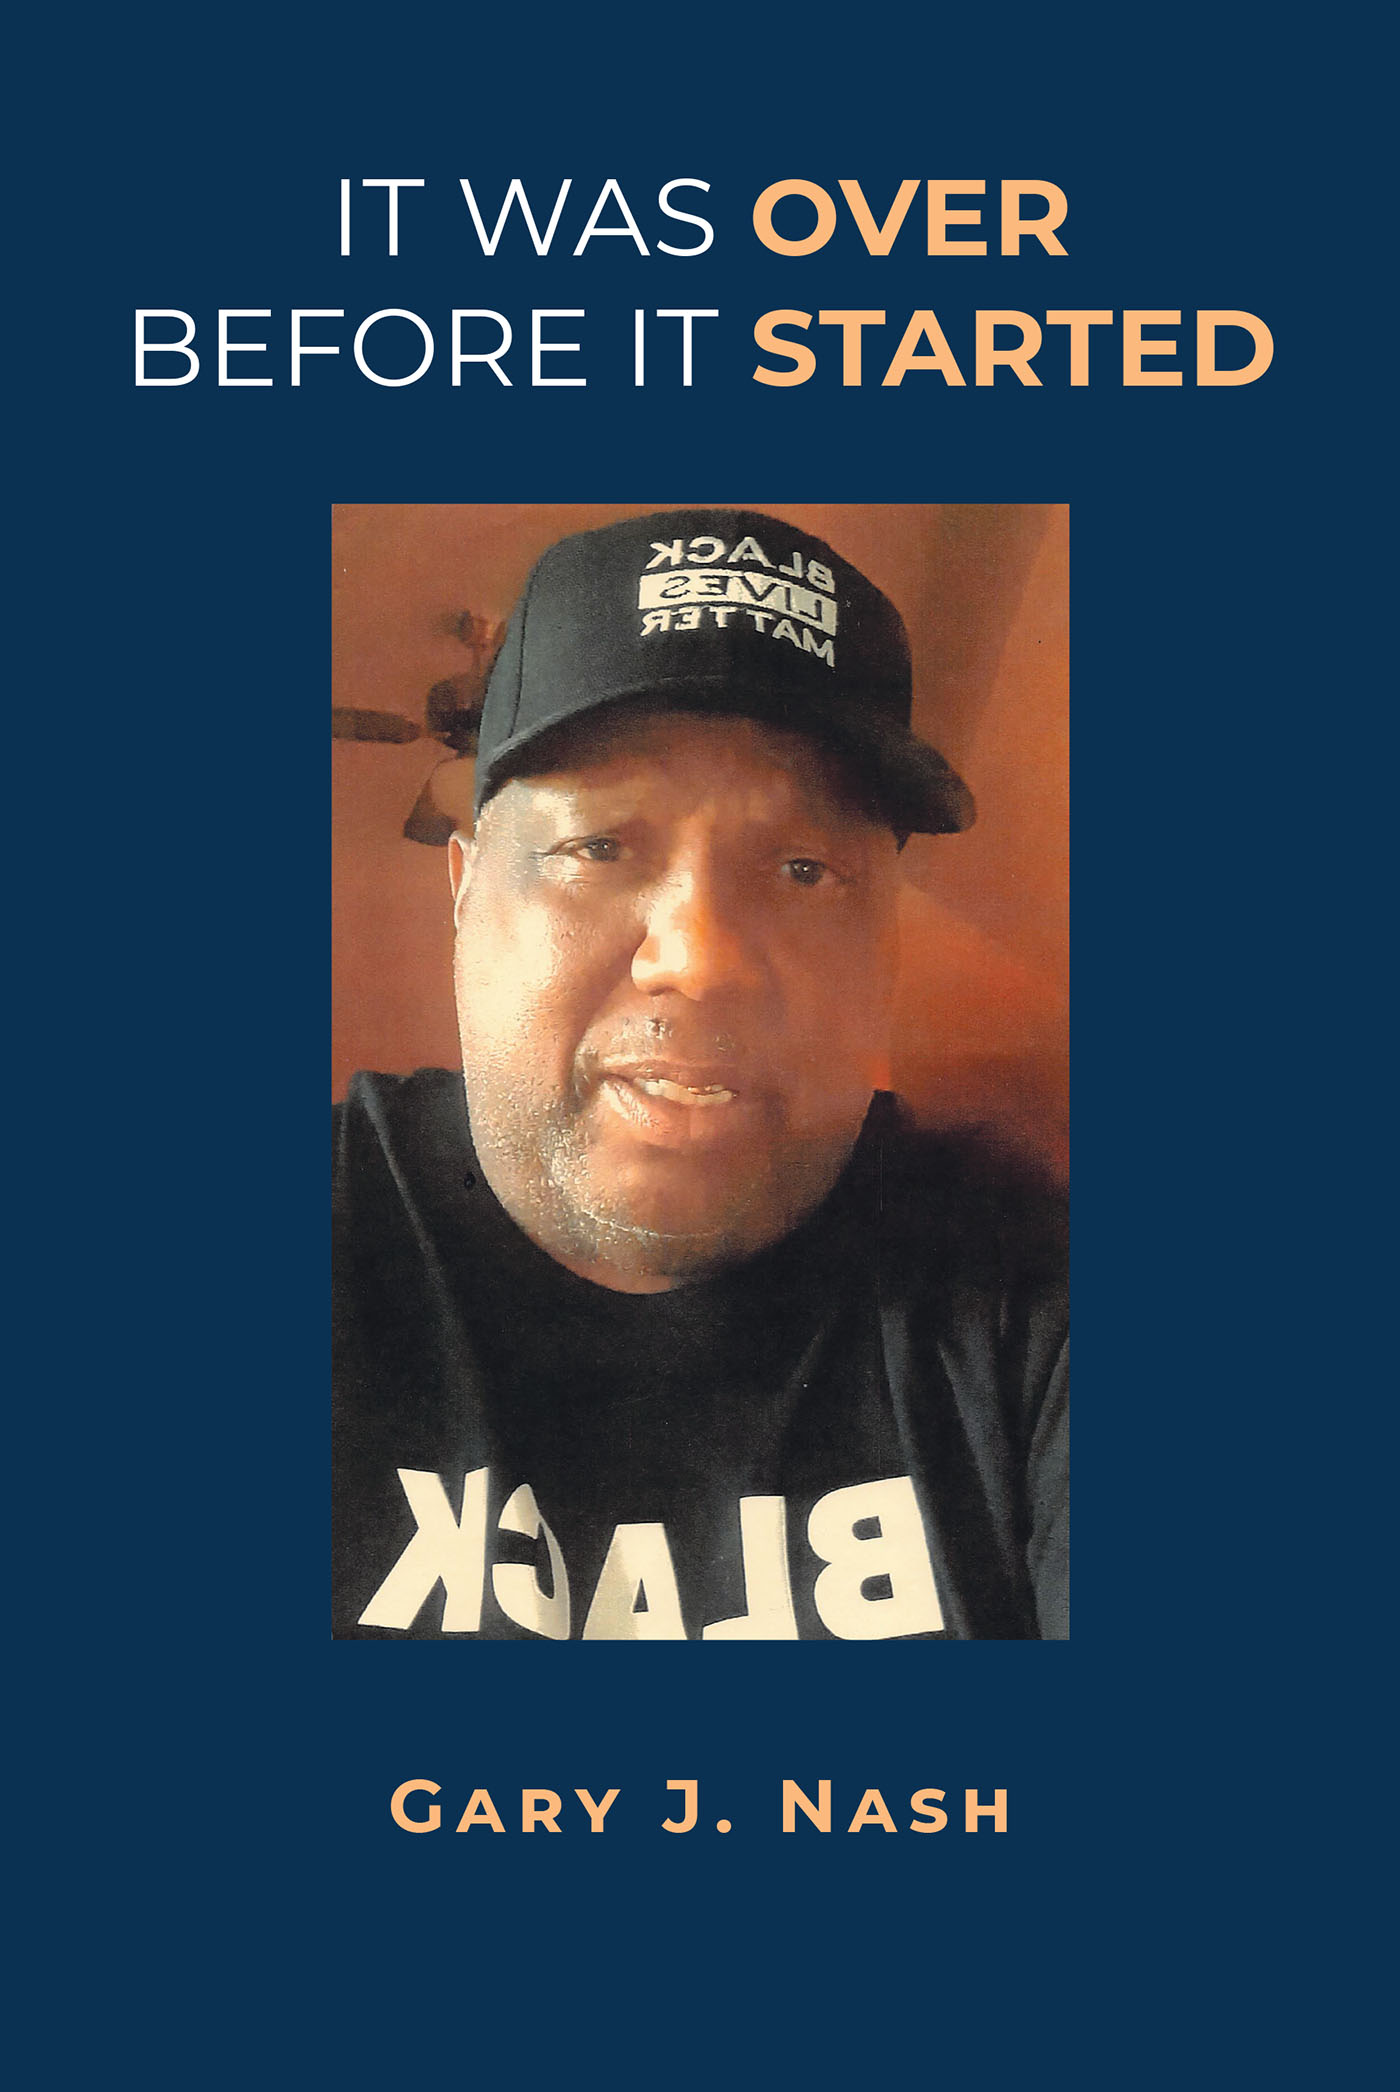 Author Gary J. Nash’s New Book, "It Was Over Before It Started," is the Story of the Author’s Life and the Struggles That Have Plagued Him Since His Birth